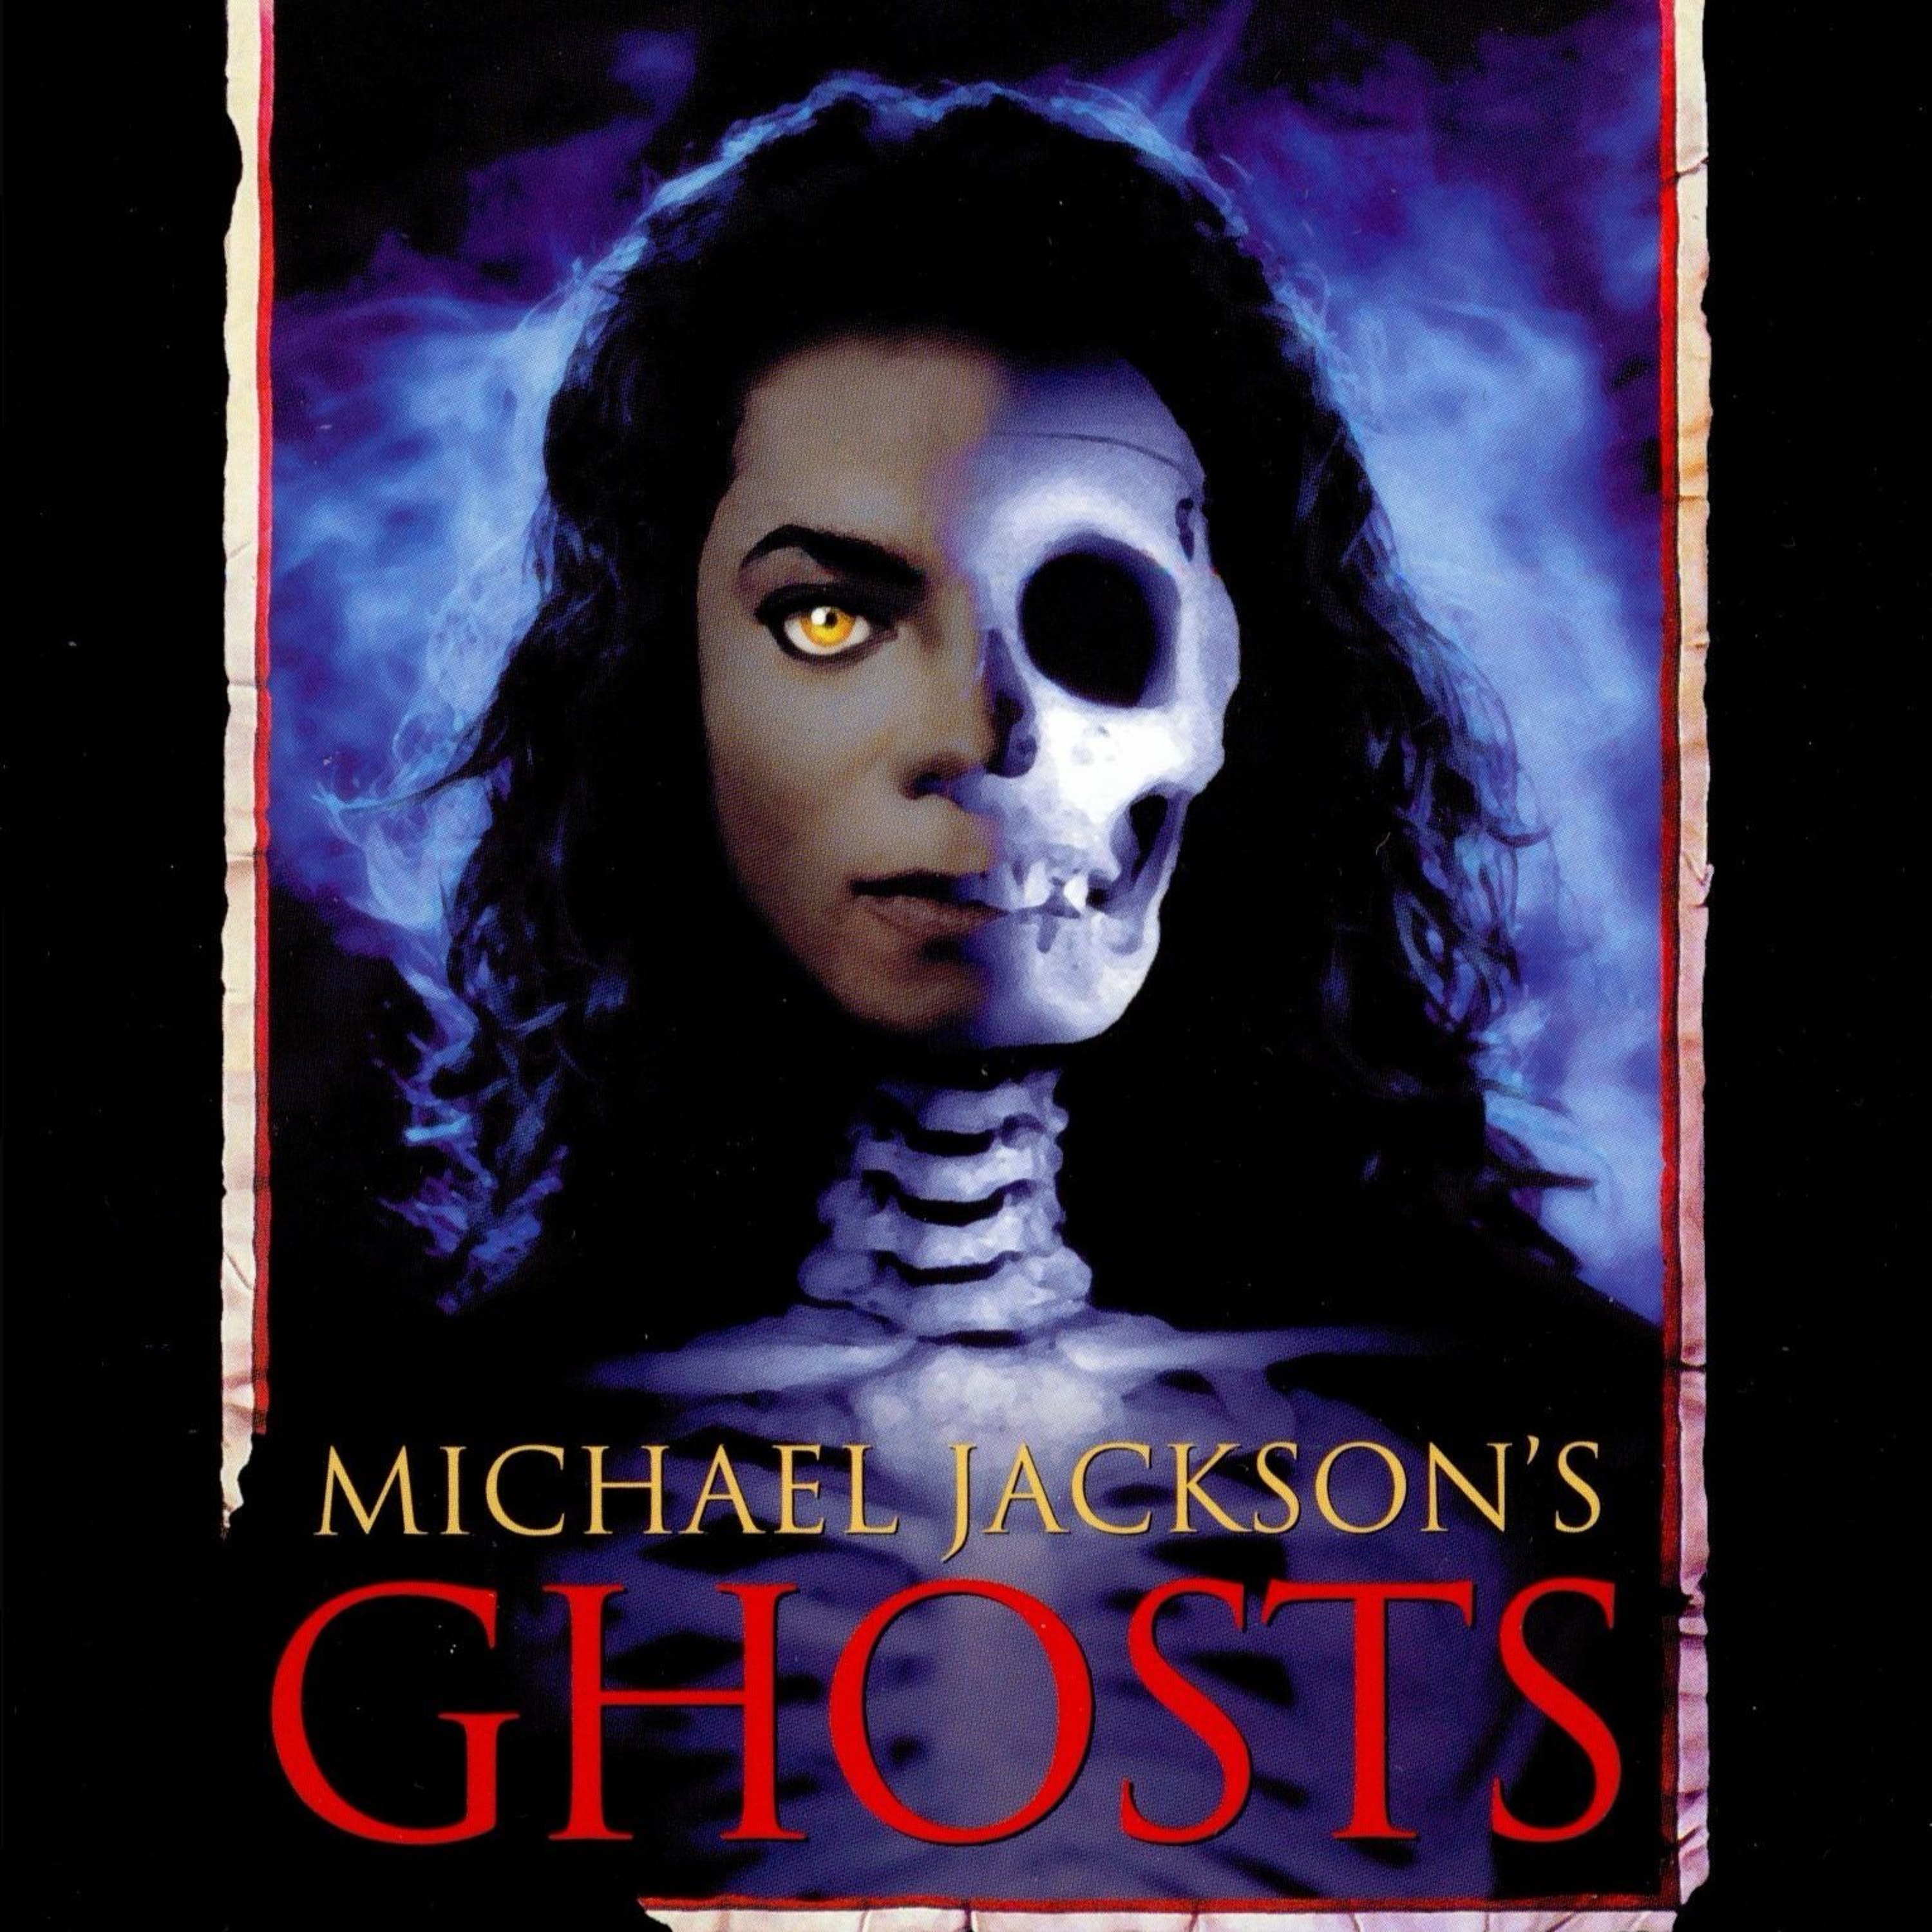 POP OF THE KING - Michael Jackson's Ghosts (1997)